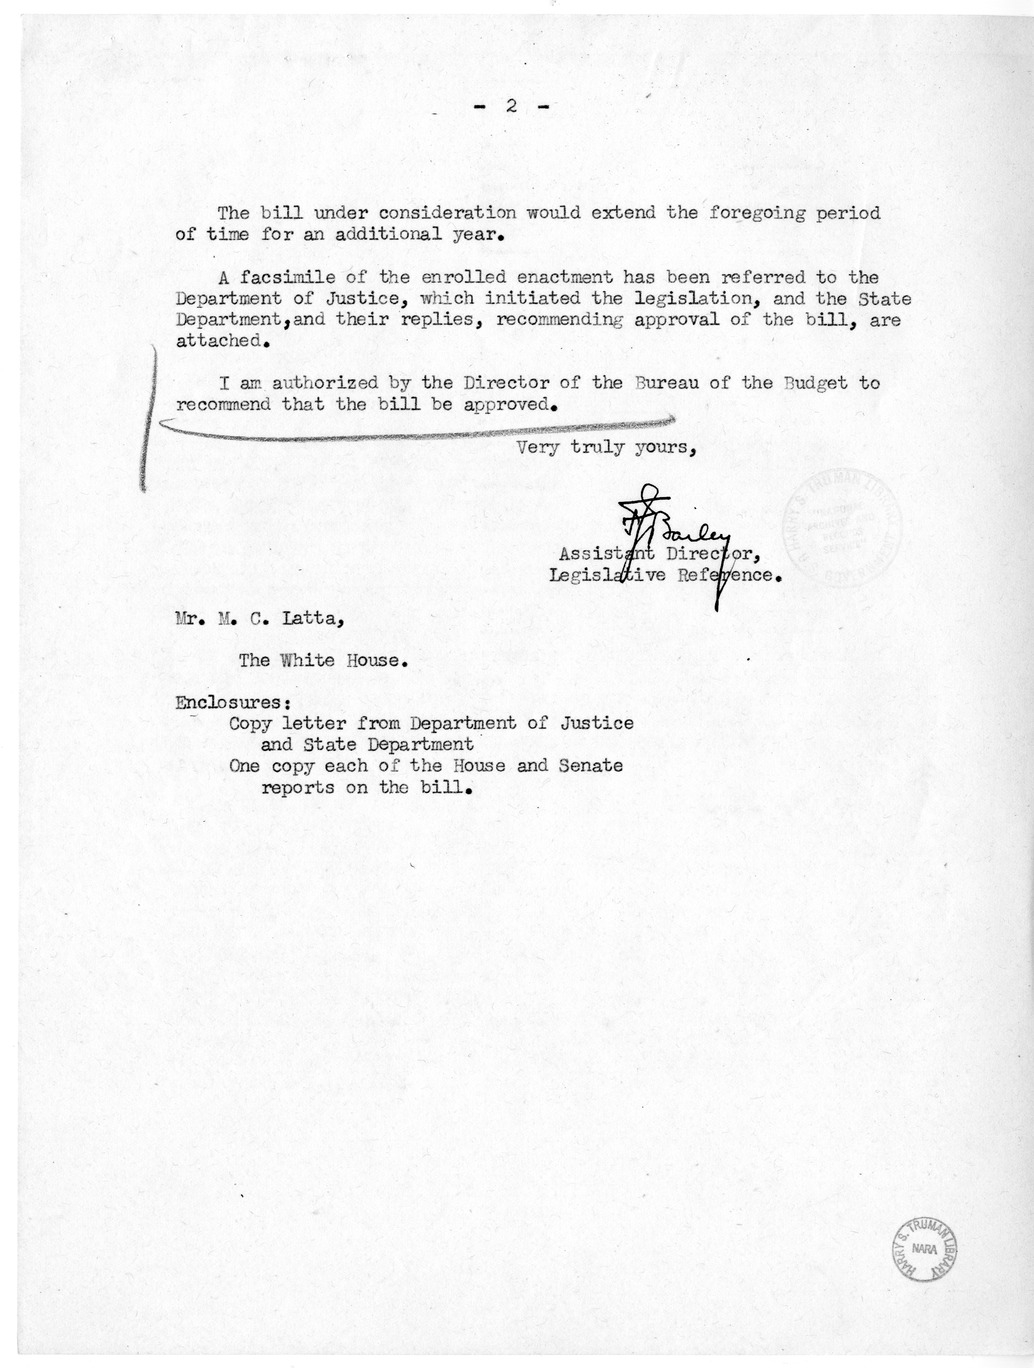 Memorandum from Frederick J. Bailey to M. C. Latta, H.R. 3466, To Amend the Nationality Act of 1940 to Preserve the Nationality of Citizens Residing Abroad, with Attachments